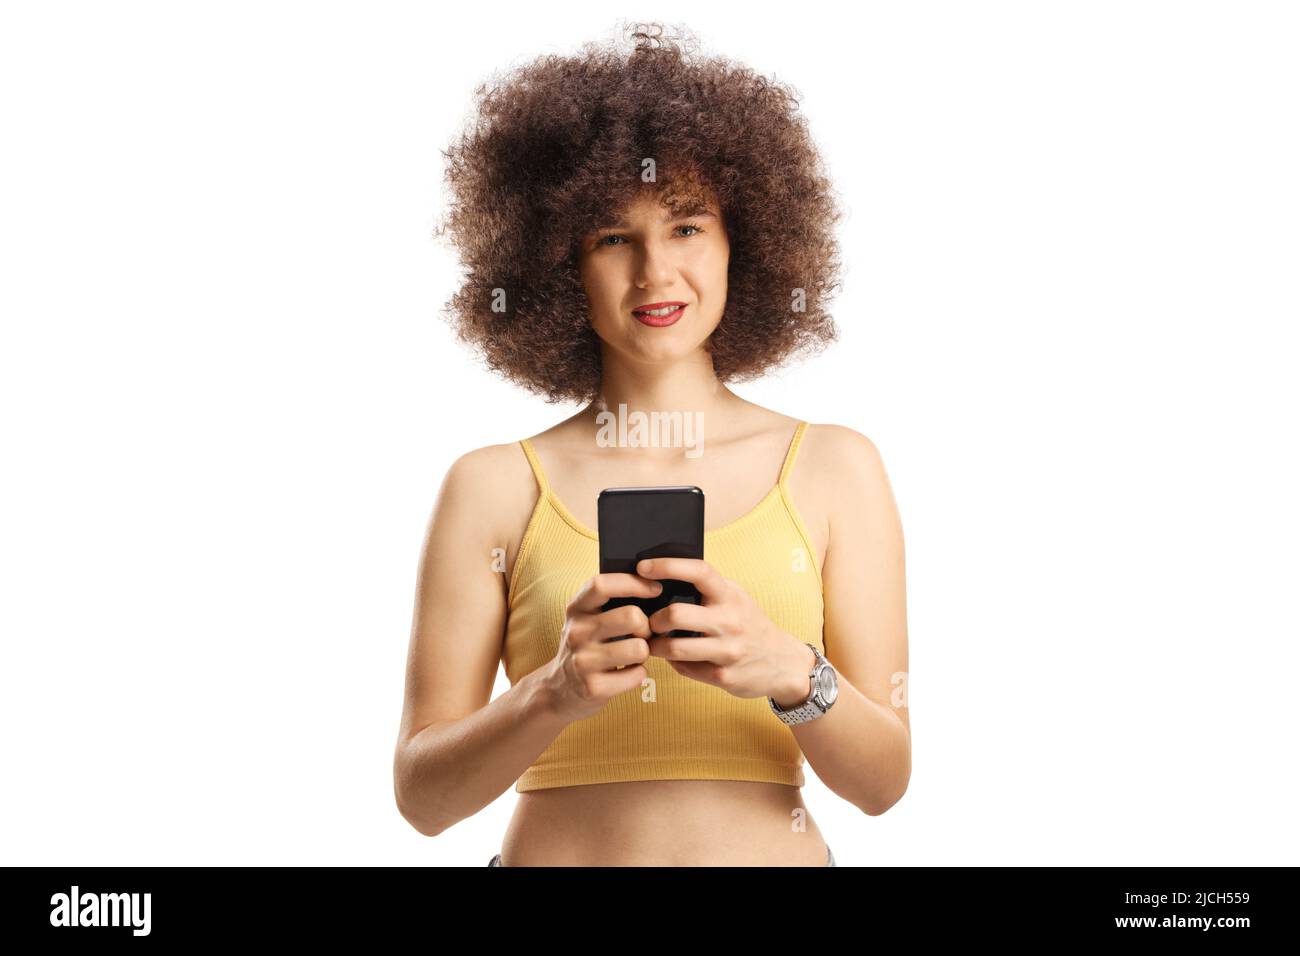 Young caucasian woman with afro hairstyle using a smartphone isolated on white background Stock Photo